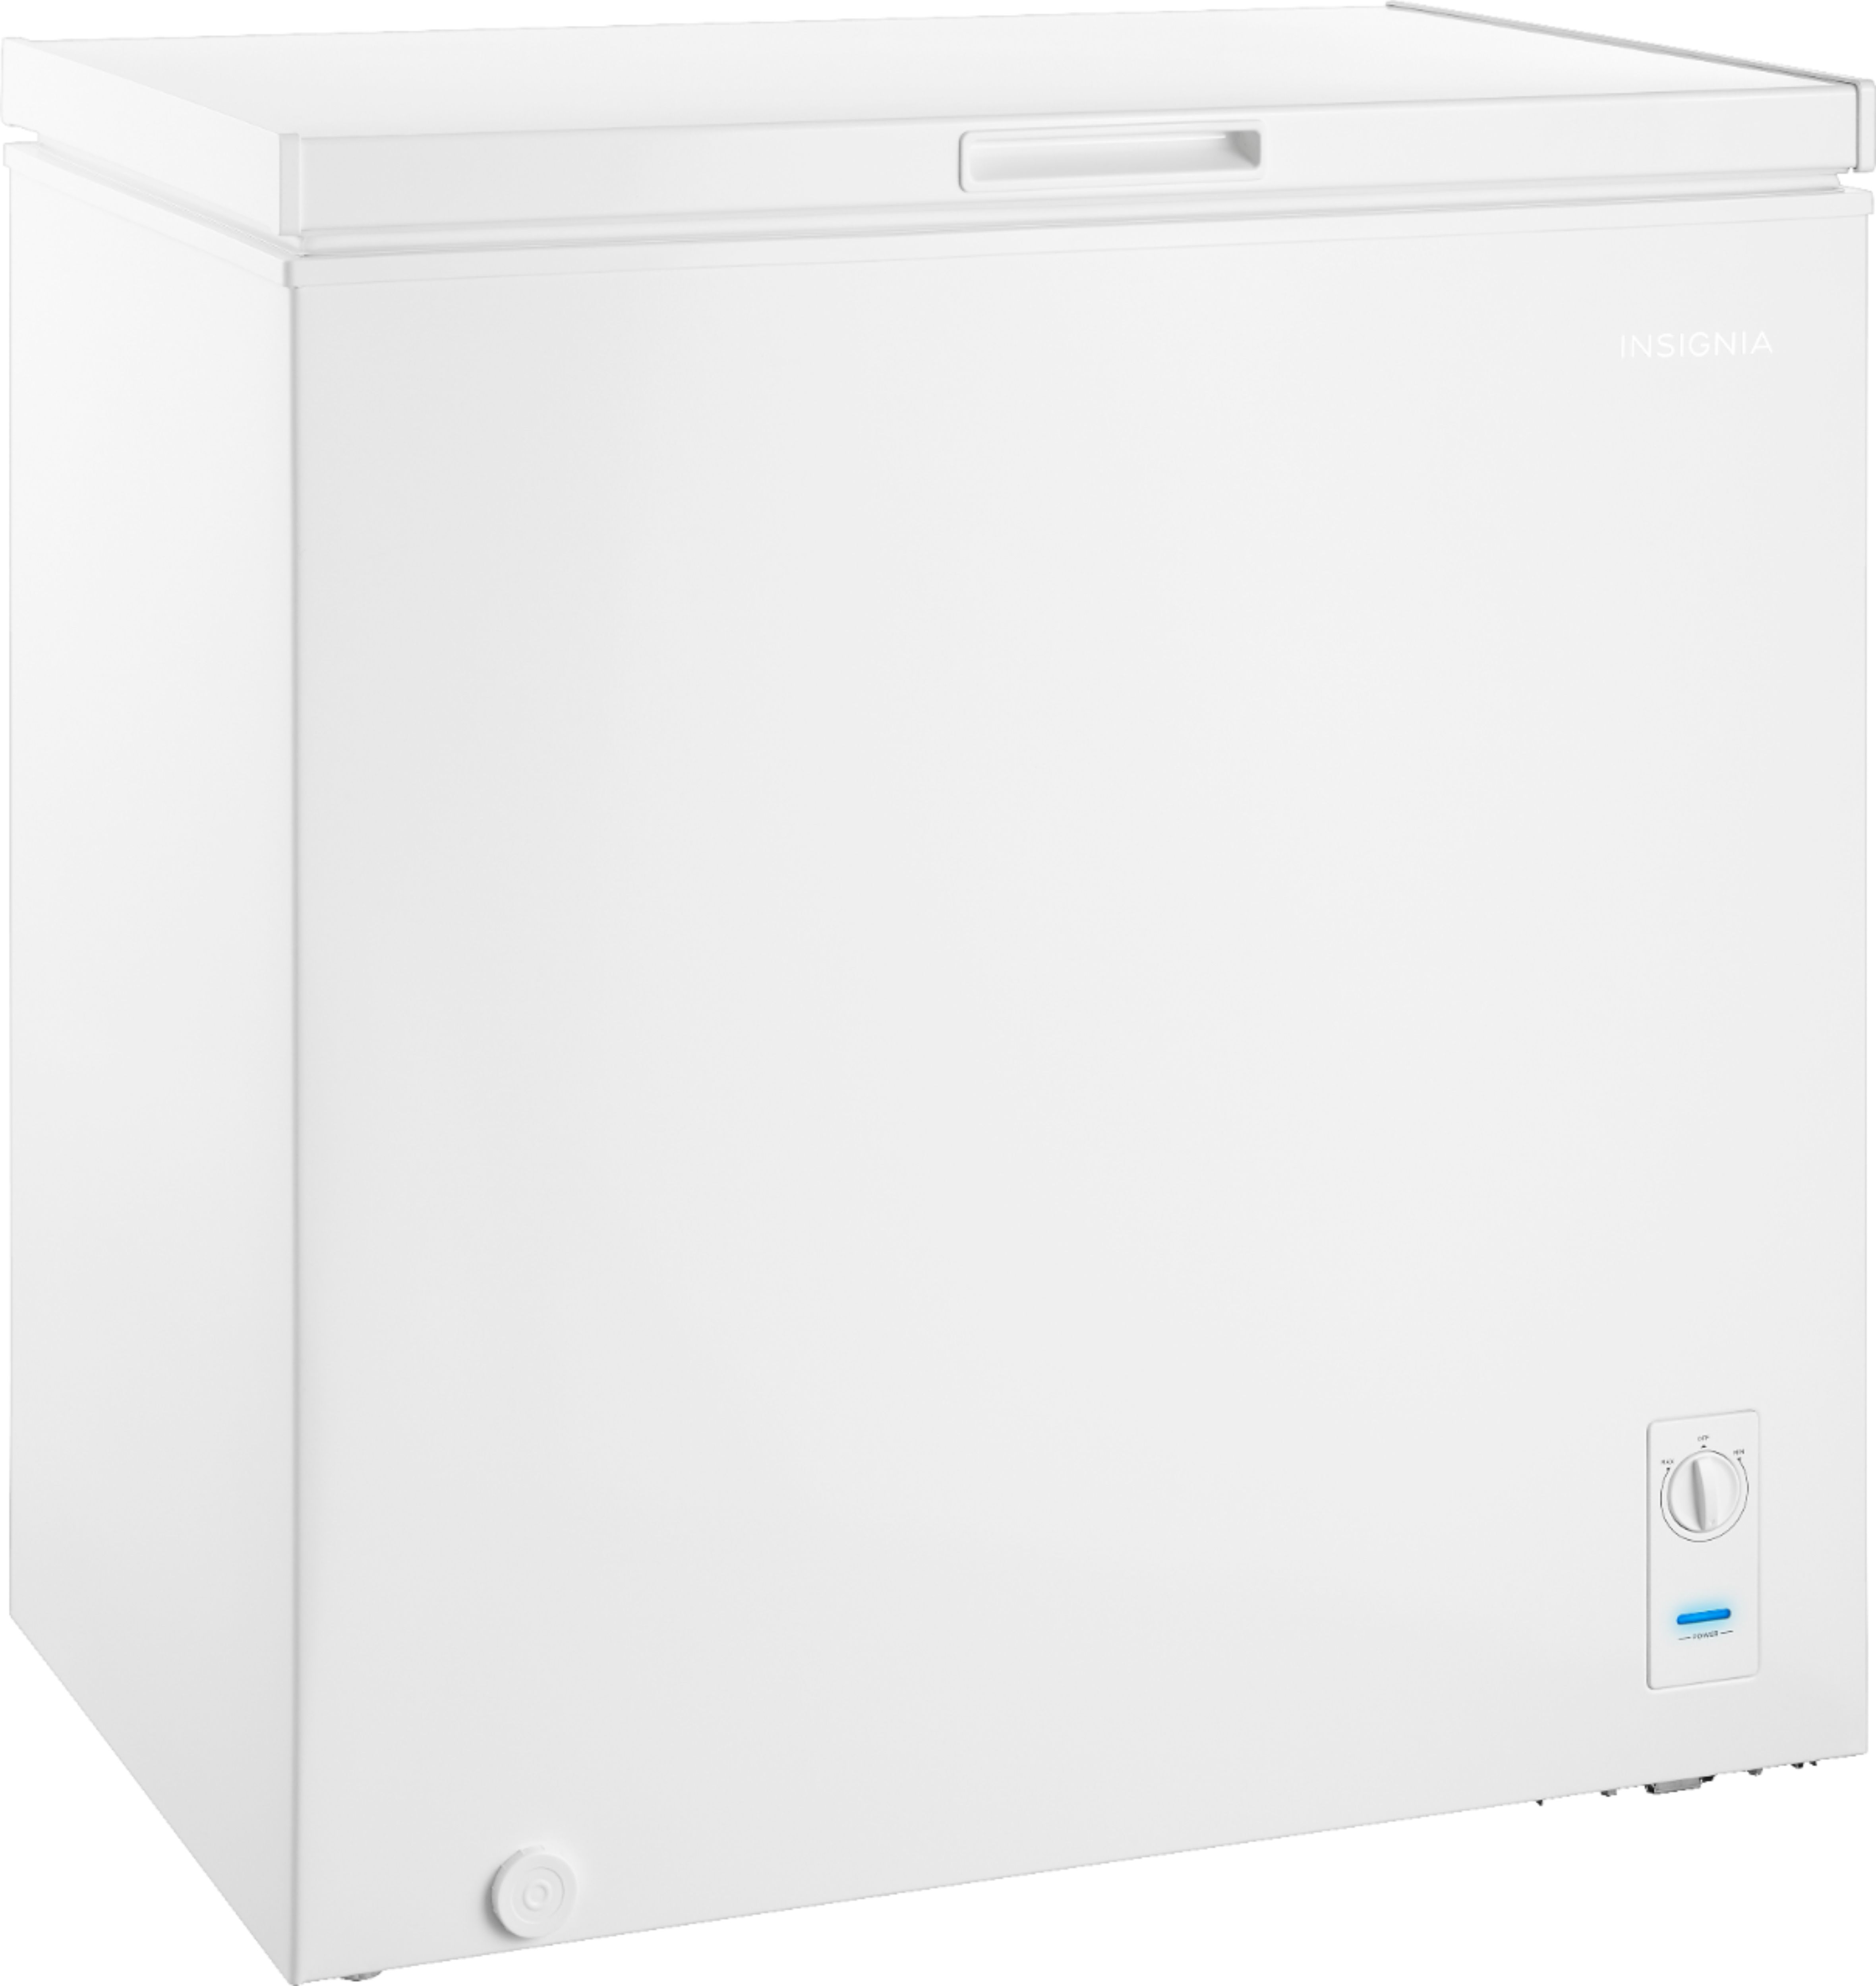 Angle View: Viking - Professional 7 Series 8.4 Cu. Ft. Upright Freezer with Interior Light - Pacific Gray